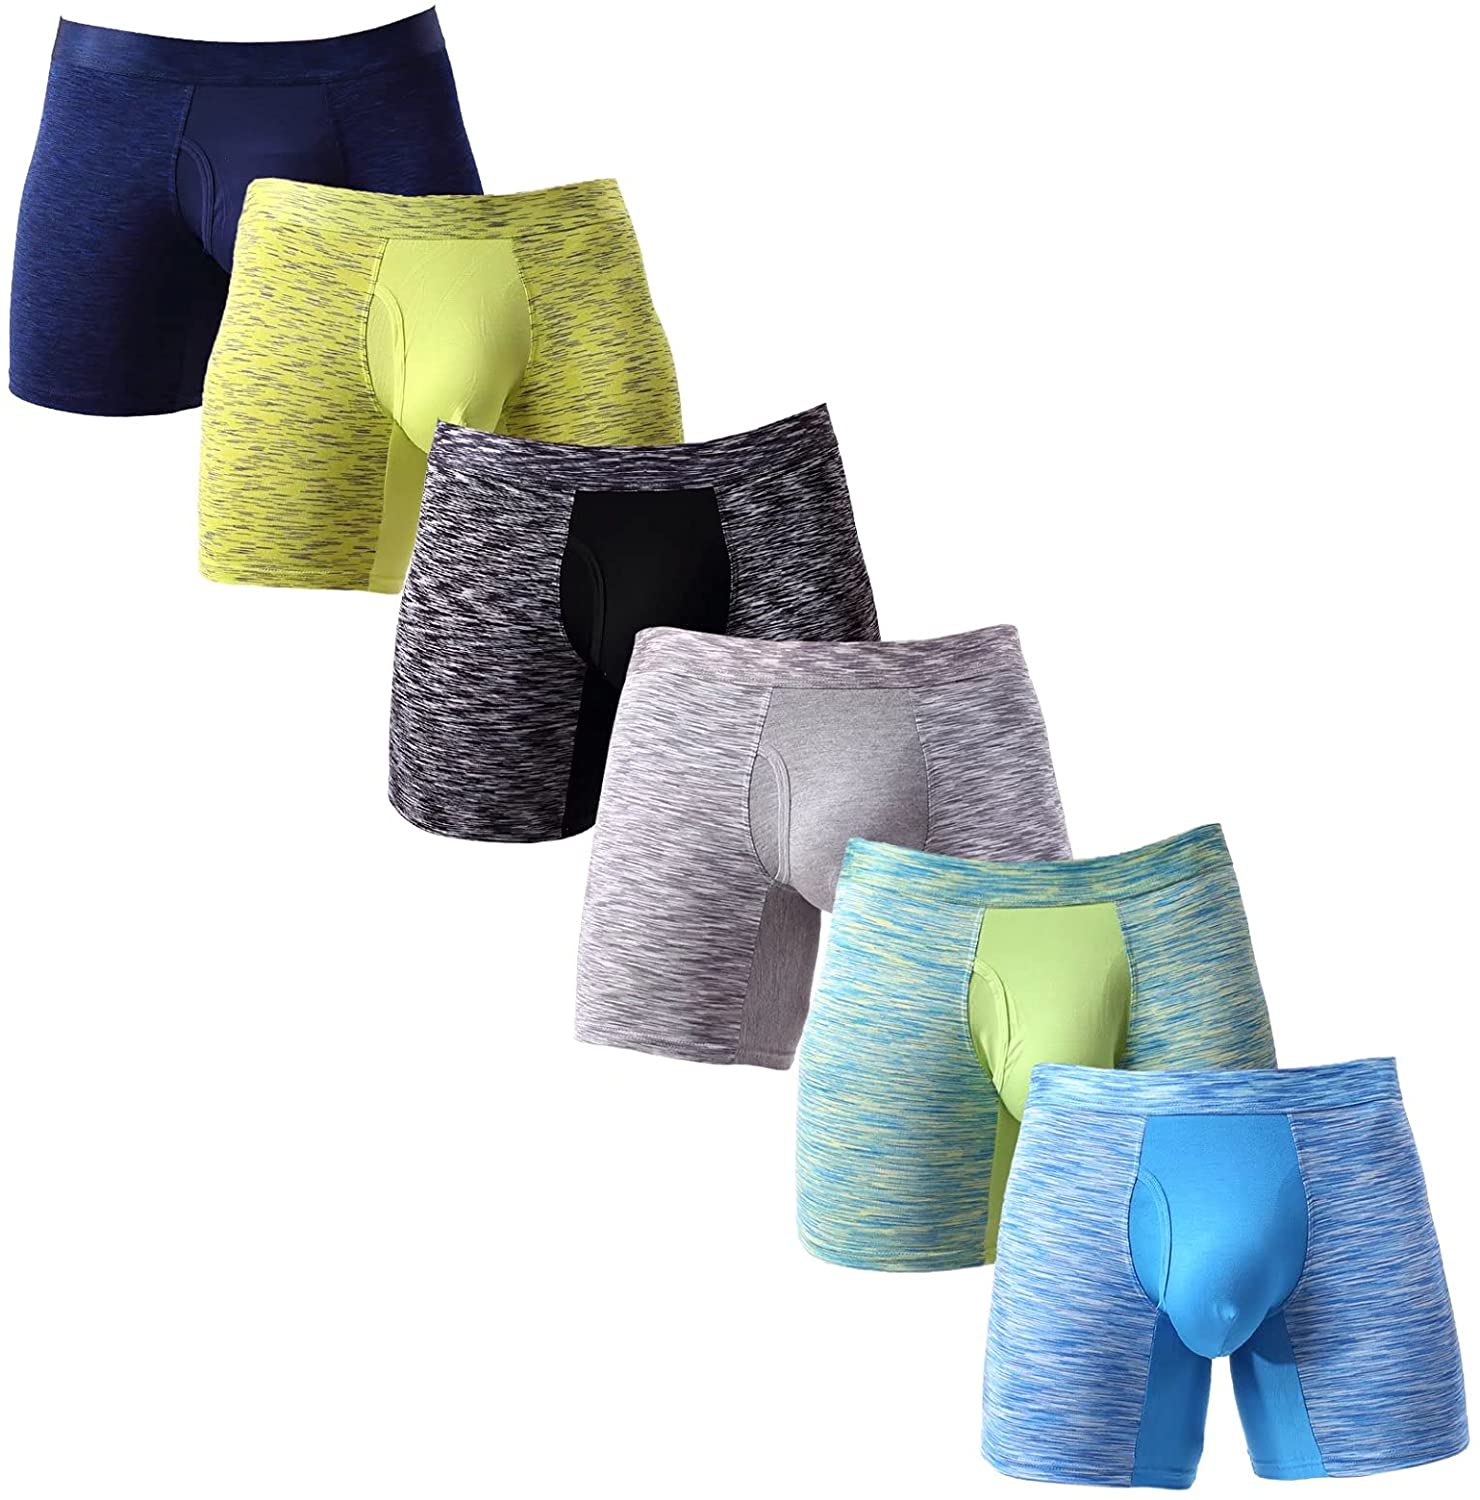 Mens No Ride up Boxer Briefs Long Leg Underwear Low Rise Soft Breathable Trunks with Bulge Pouch 